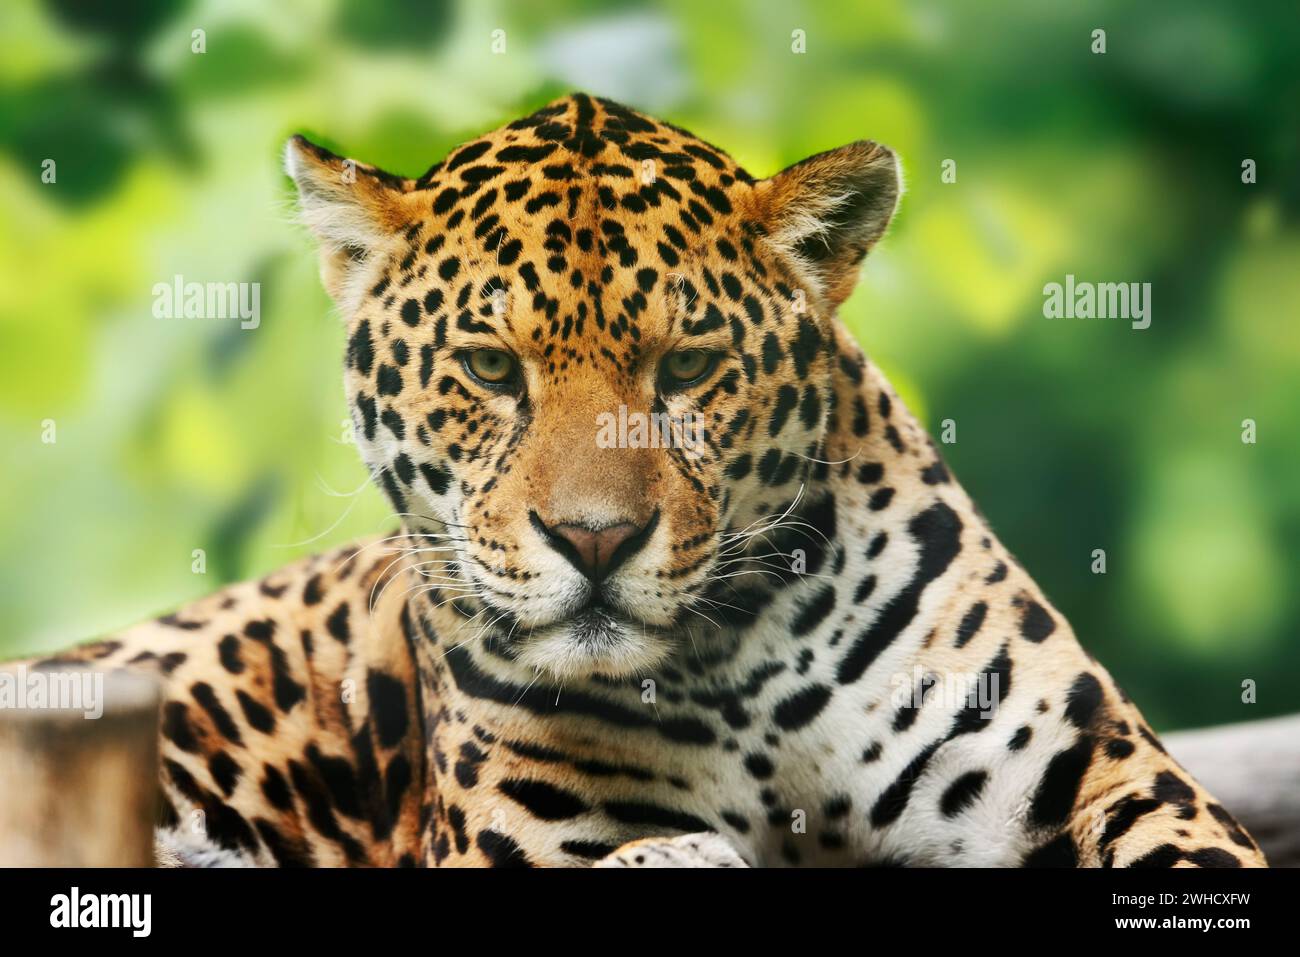 Jaguar (Panthera onca), portrait, female, occurring in Central America and South America Stock Photo